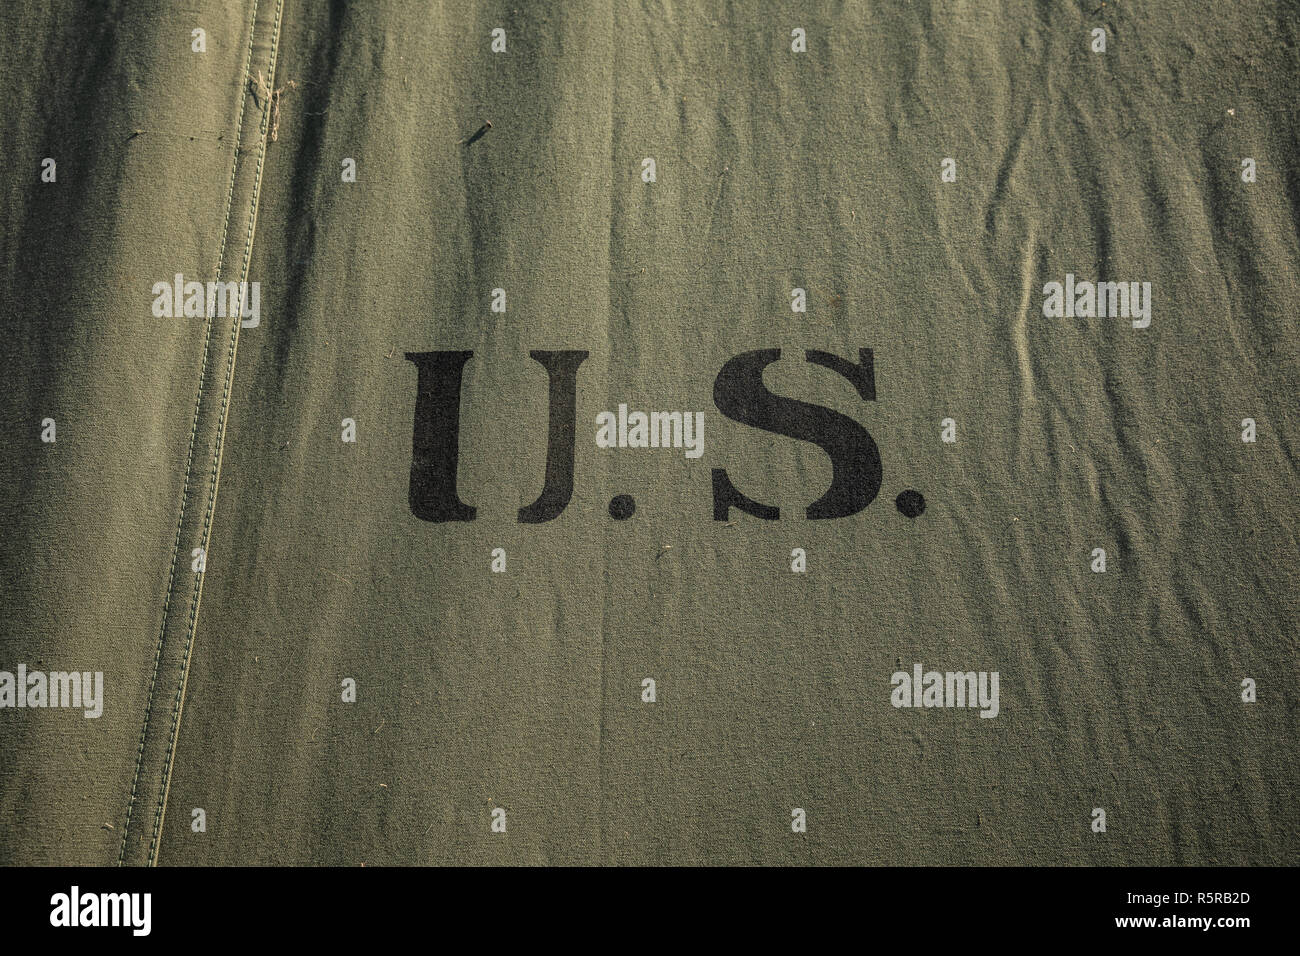 Green military tent fabric with U.S. initials Stock Photo